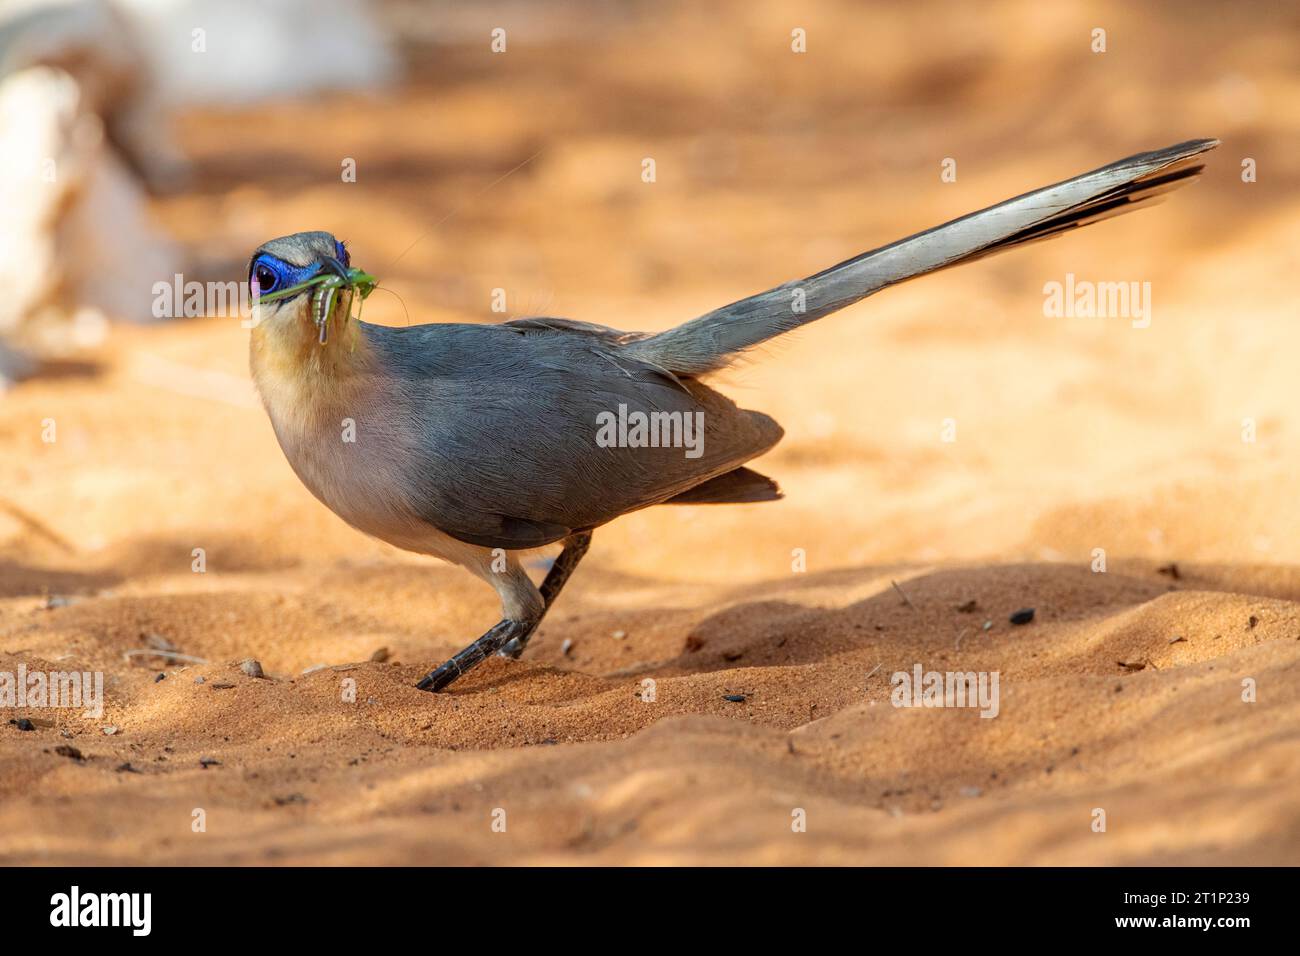 Running Coua (Coua cursor), an endemic species from the semiarid lowland forests of southwest Madagascar. Stock Photo